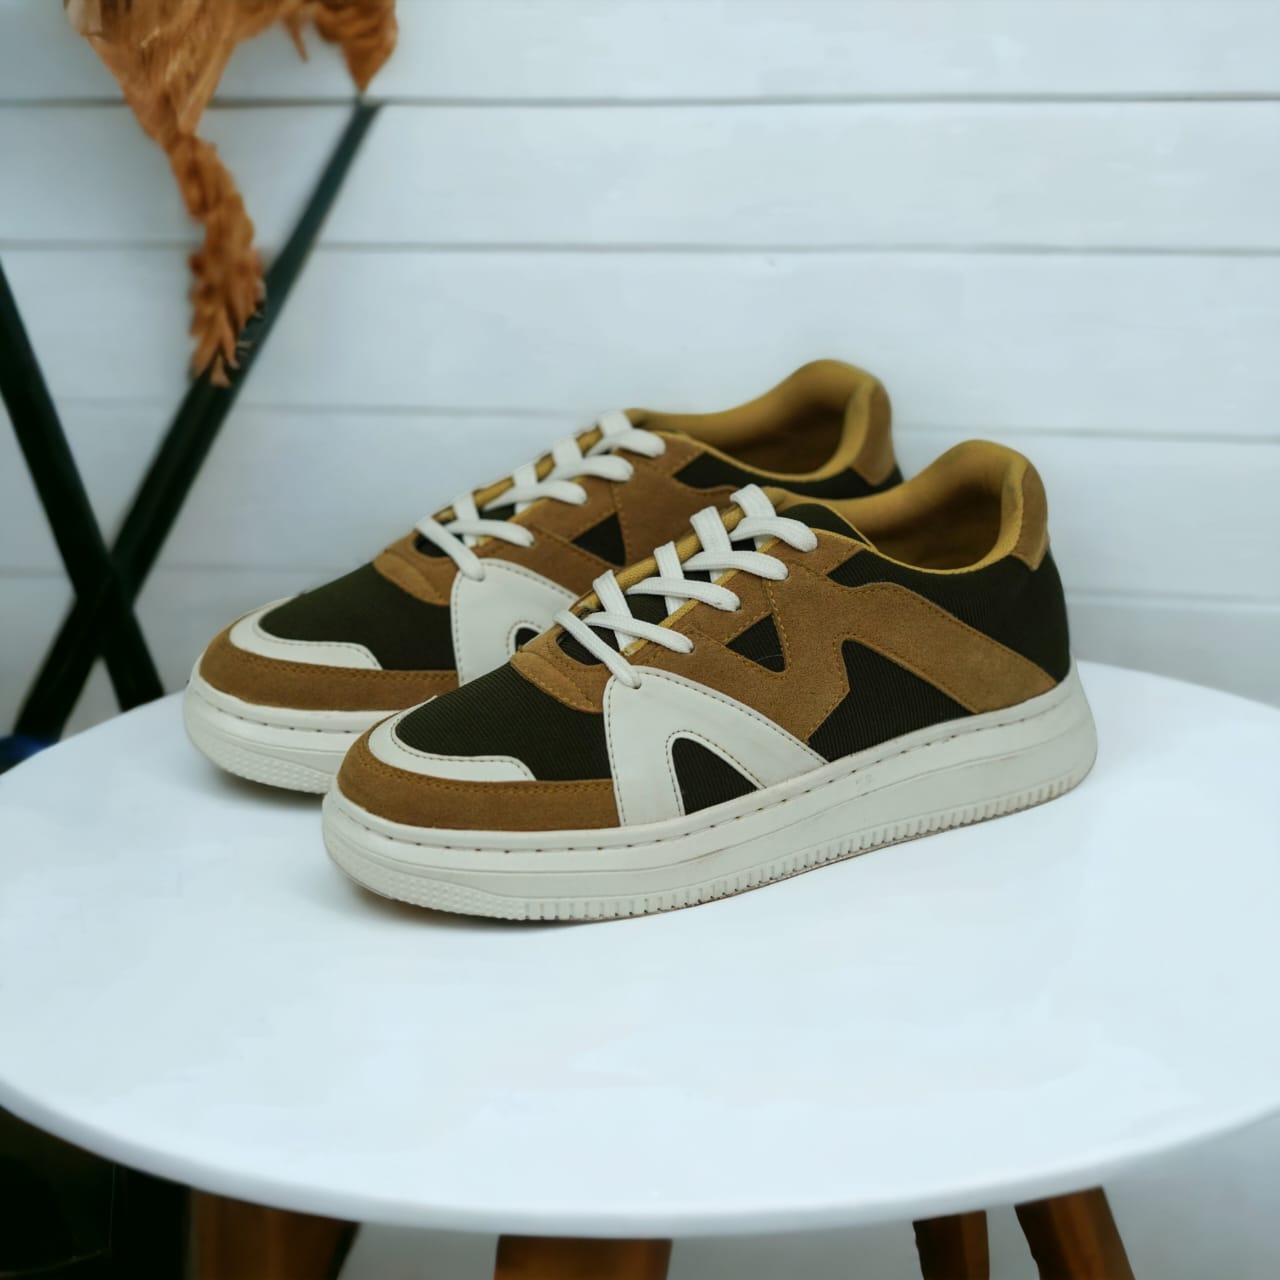 The Aurous Evoke Olive Laceup Sneakers